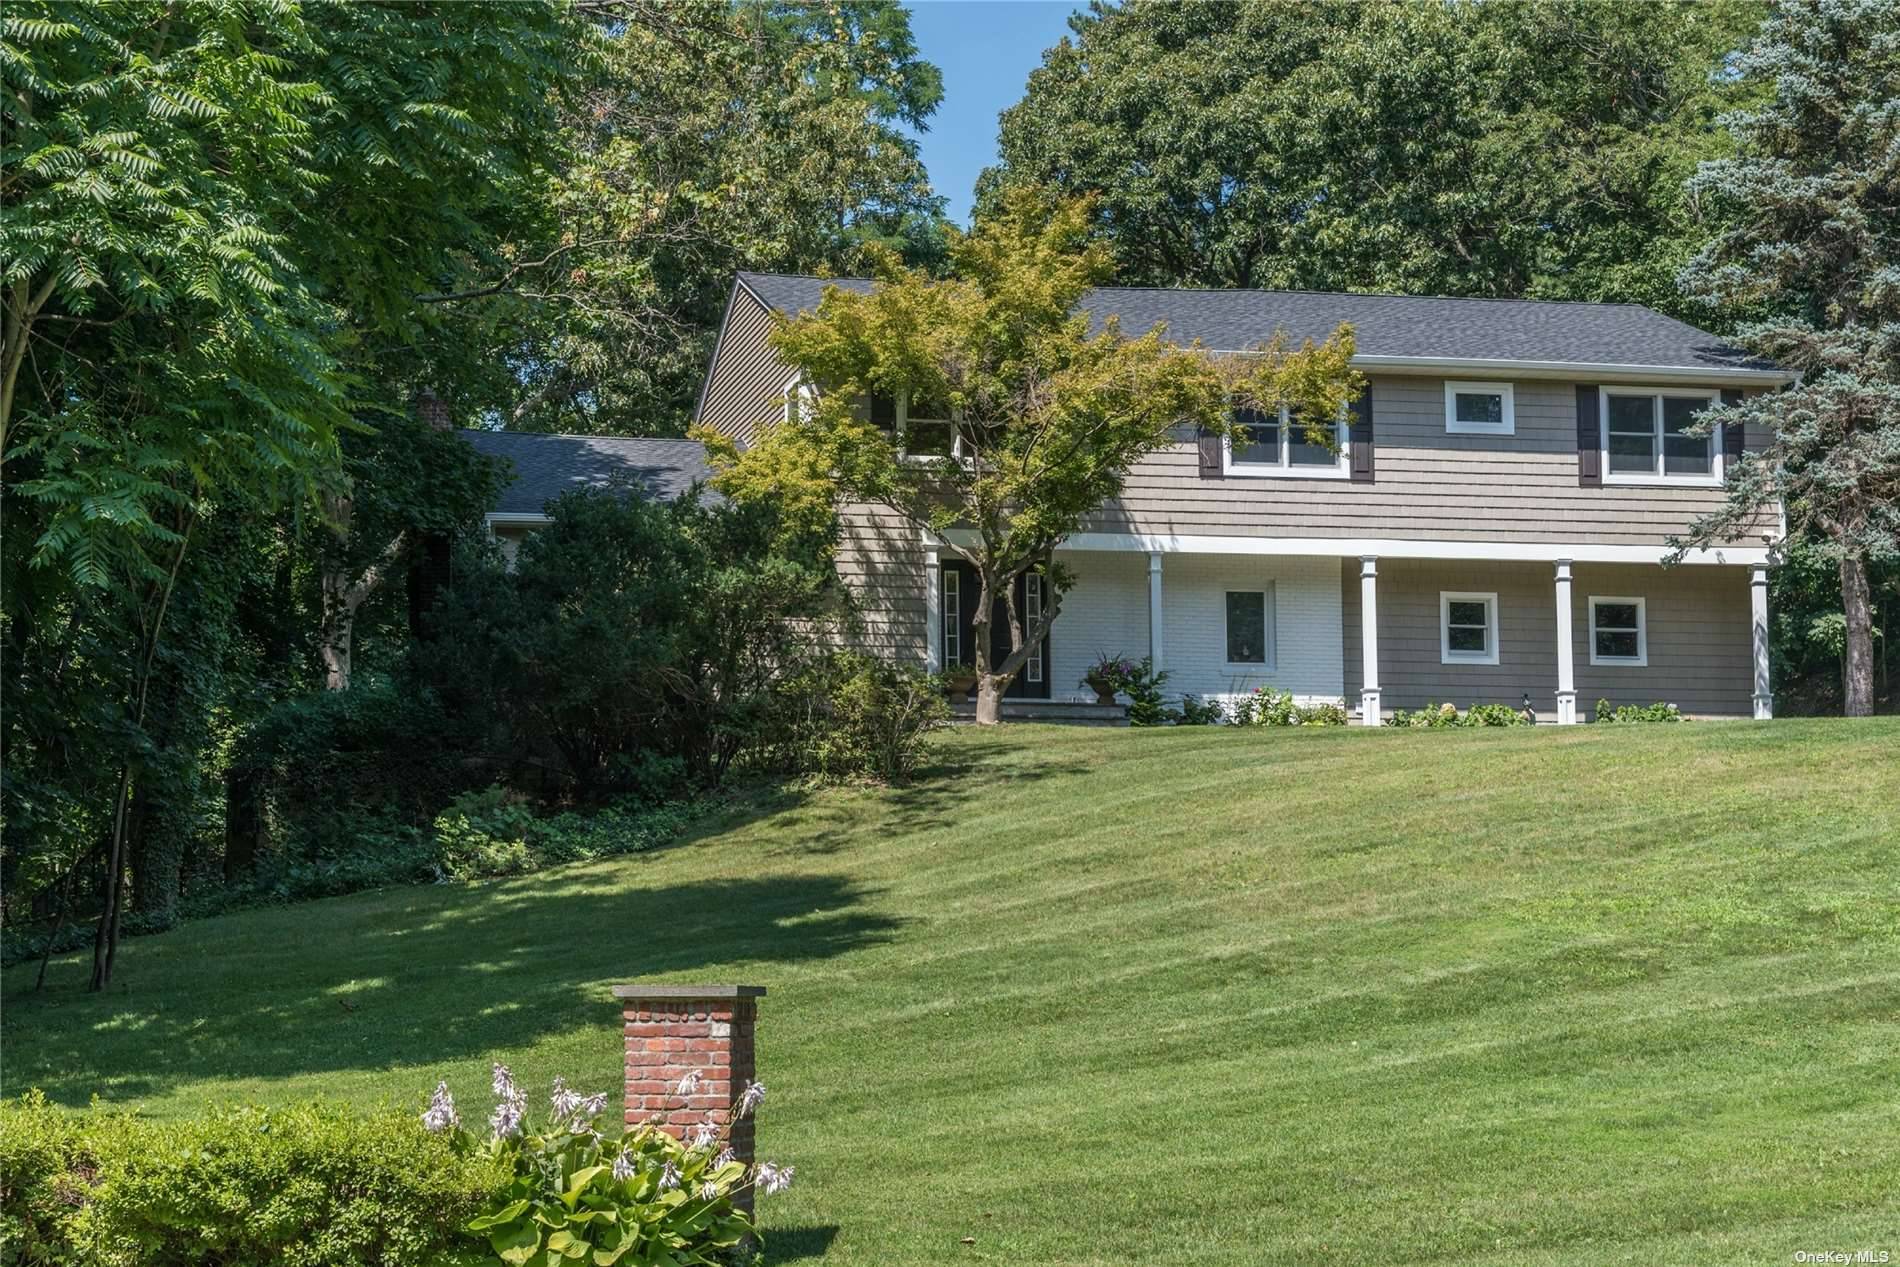 LATTINGTOWN. Completely redone and renovated Colonial situated on over 2 acres in Lattingtown.